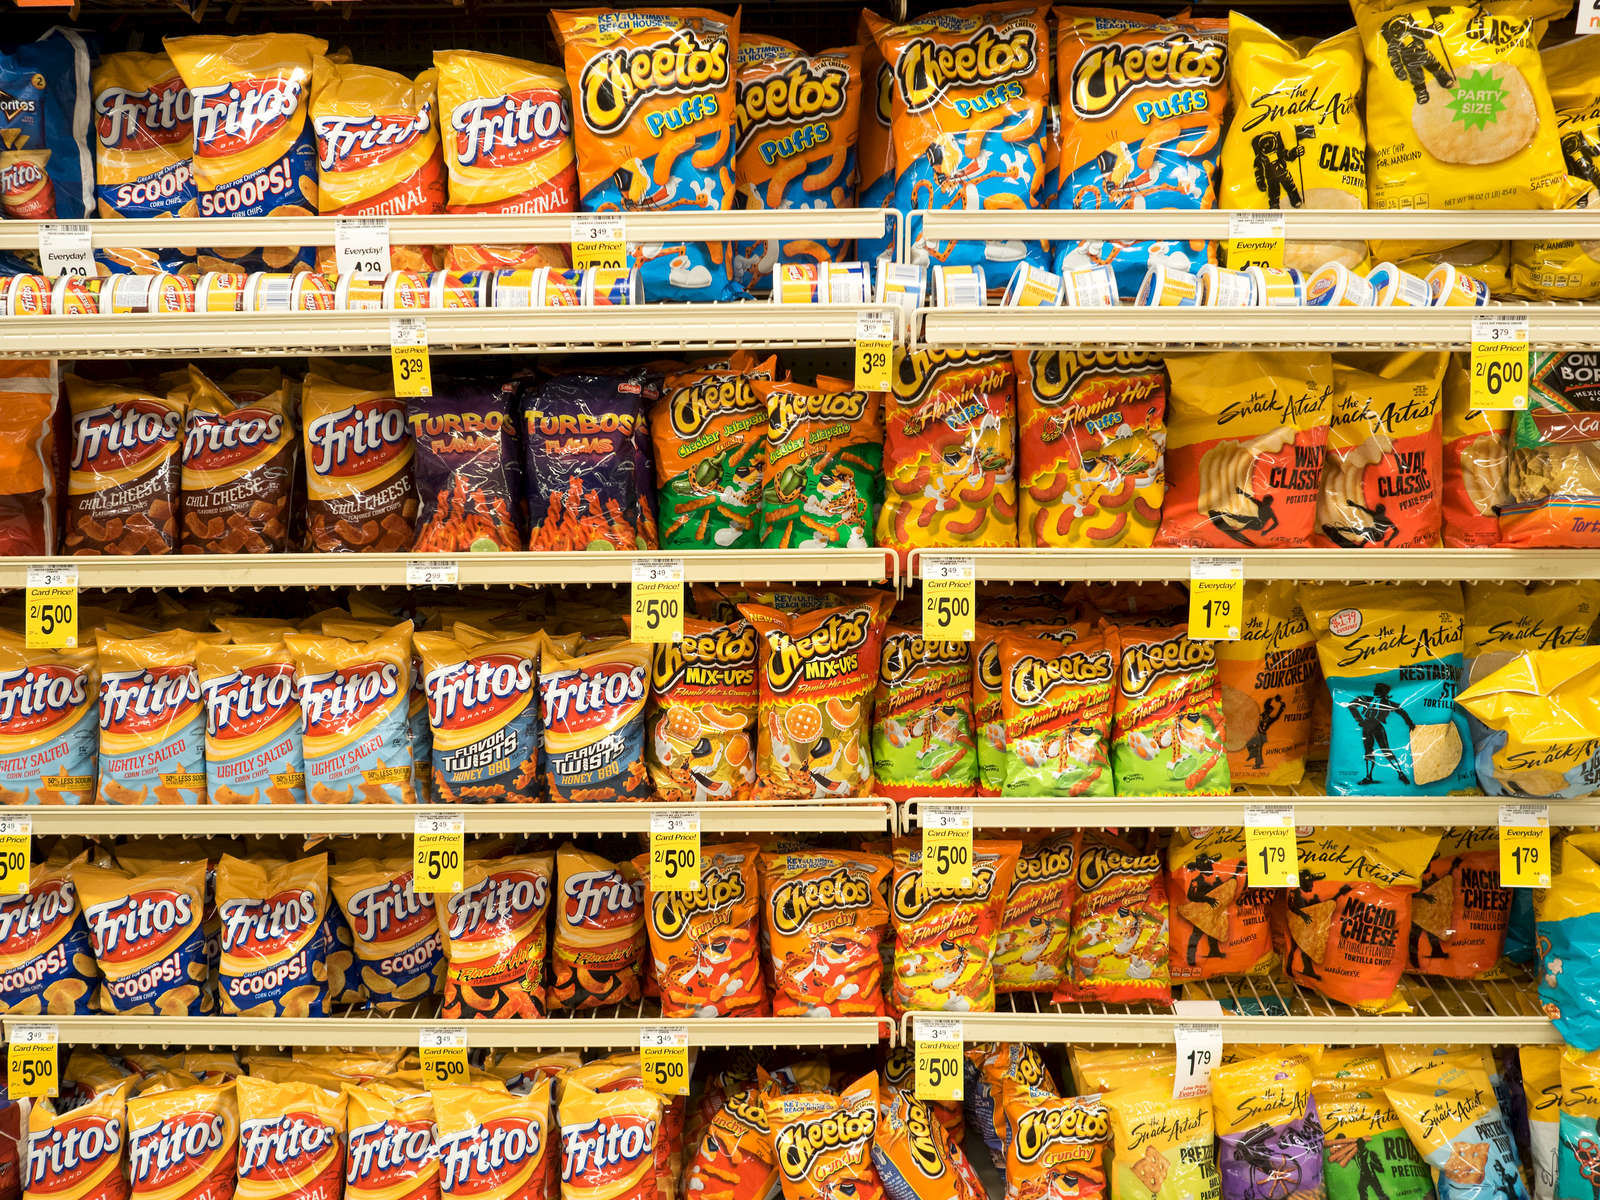 Crisps for sale in a supermarket in the Richardson district of Dallas.Dallas is a major city in Texas and is the largest urban center of the fourth most populous metropolitan area in the United States. The city ranks ninth in the U.S. and third in Texas after Houston and San Antonio. The city's prominence arose from its historical importance as a center for the oil and cotton industries, and its position along numerous railroad lines.For two weeks in the summer of 2015, photographer Peter Dench visited Dallas to document the metroplex in his epic reportage, DENCH DOES DALLAS.Photographed using an Olympus E-M5 Mark II©Peter Dench/Getty Images Reportage